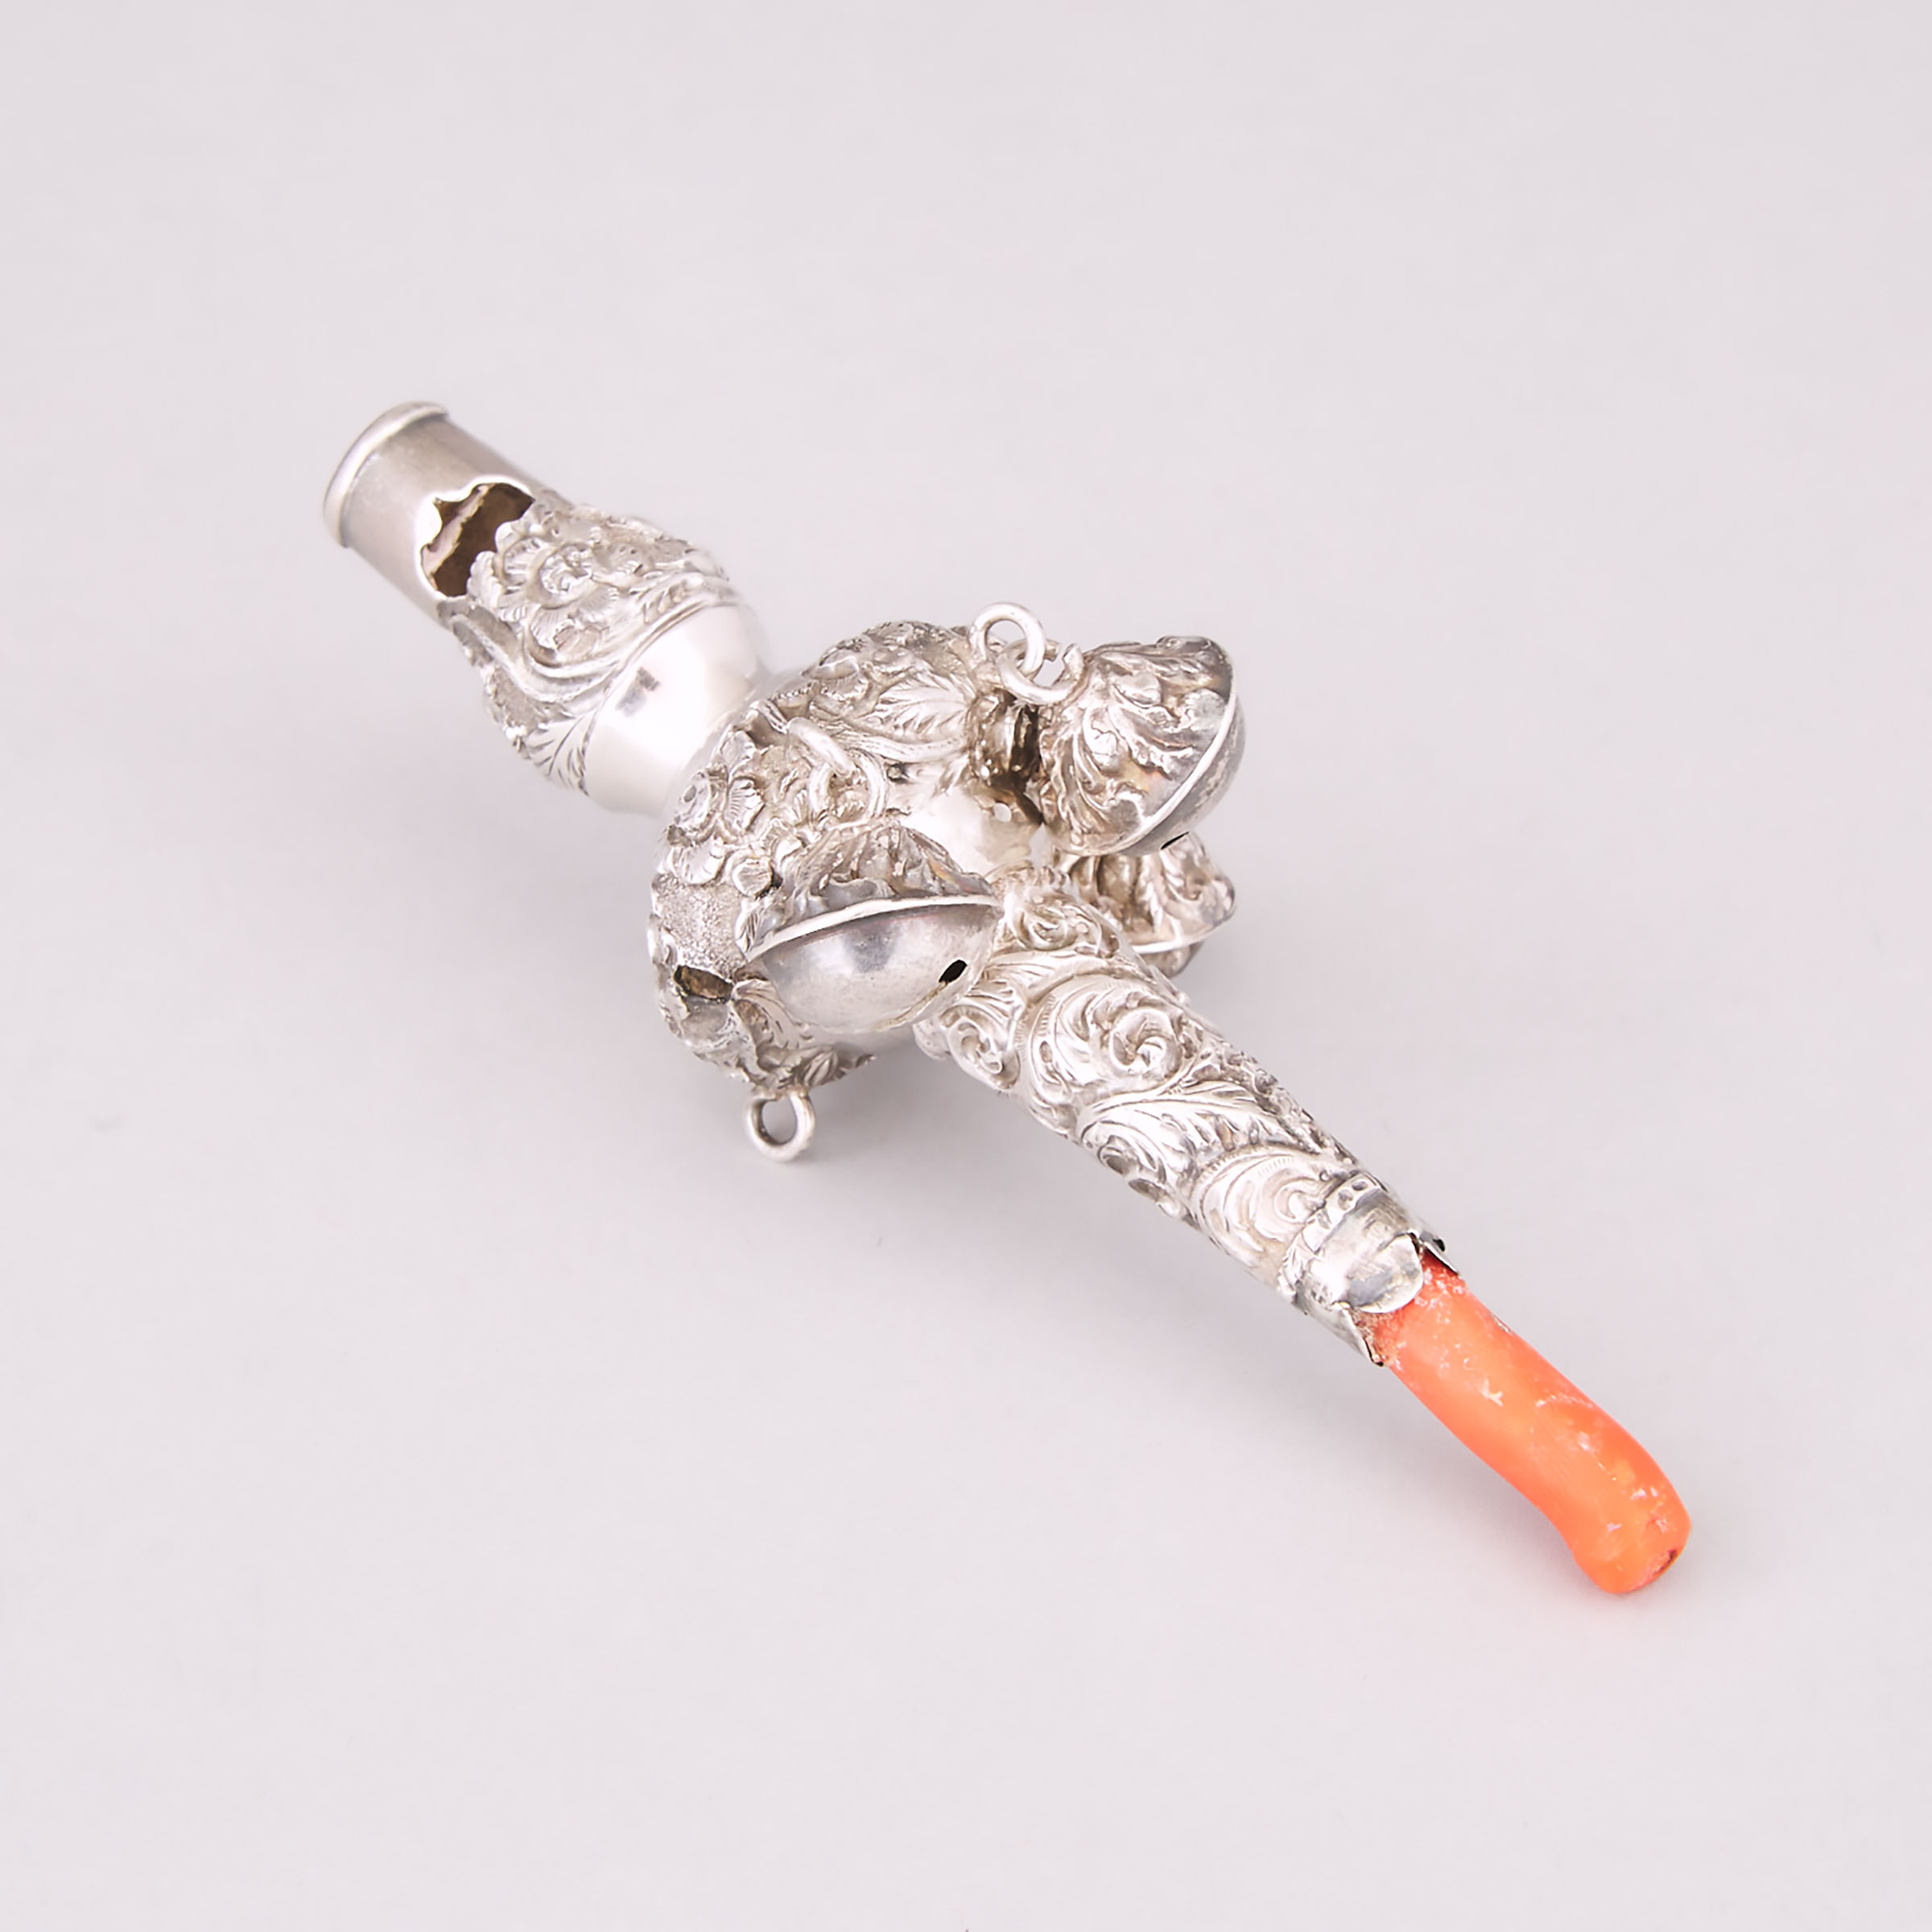 William IV Silver Child's Rattle and Whistle, Francis Clark, Birmingham, 1836